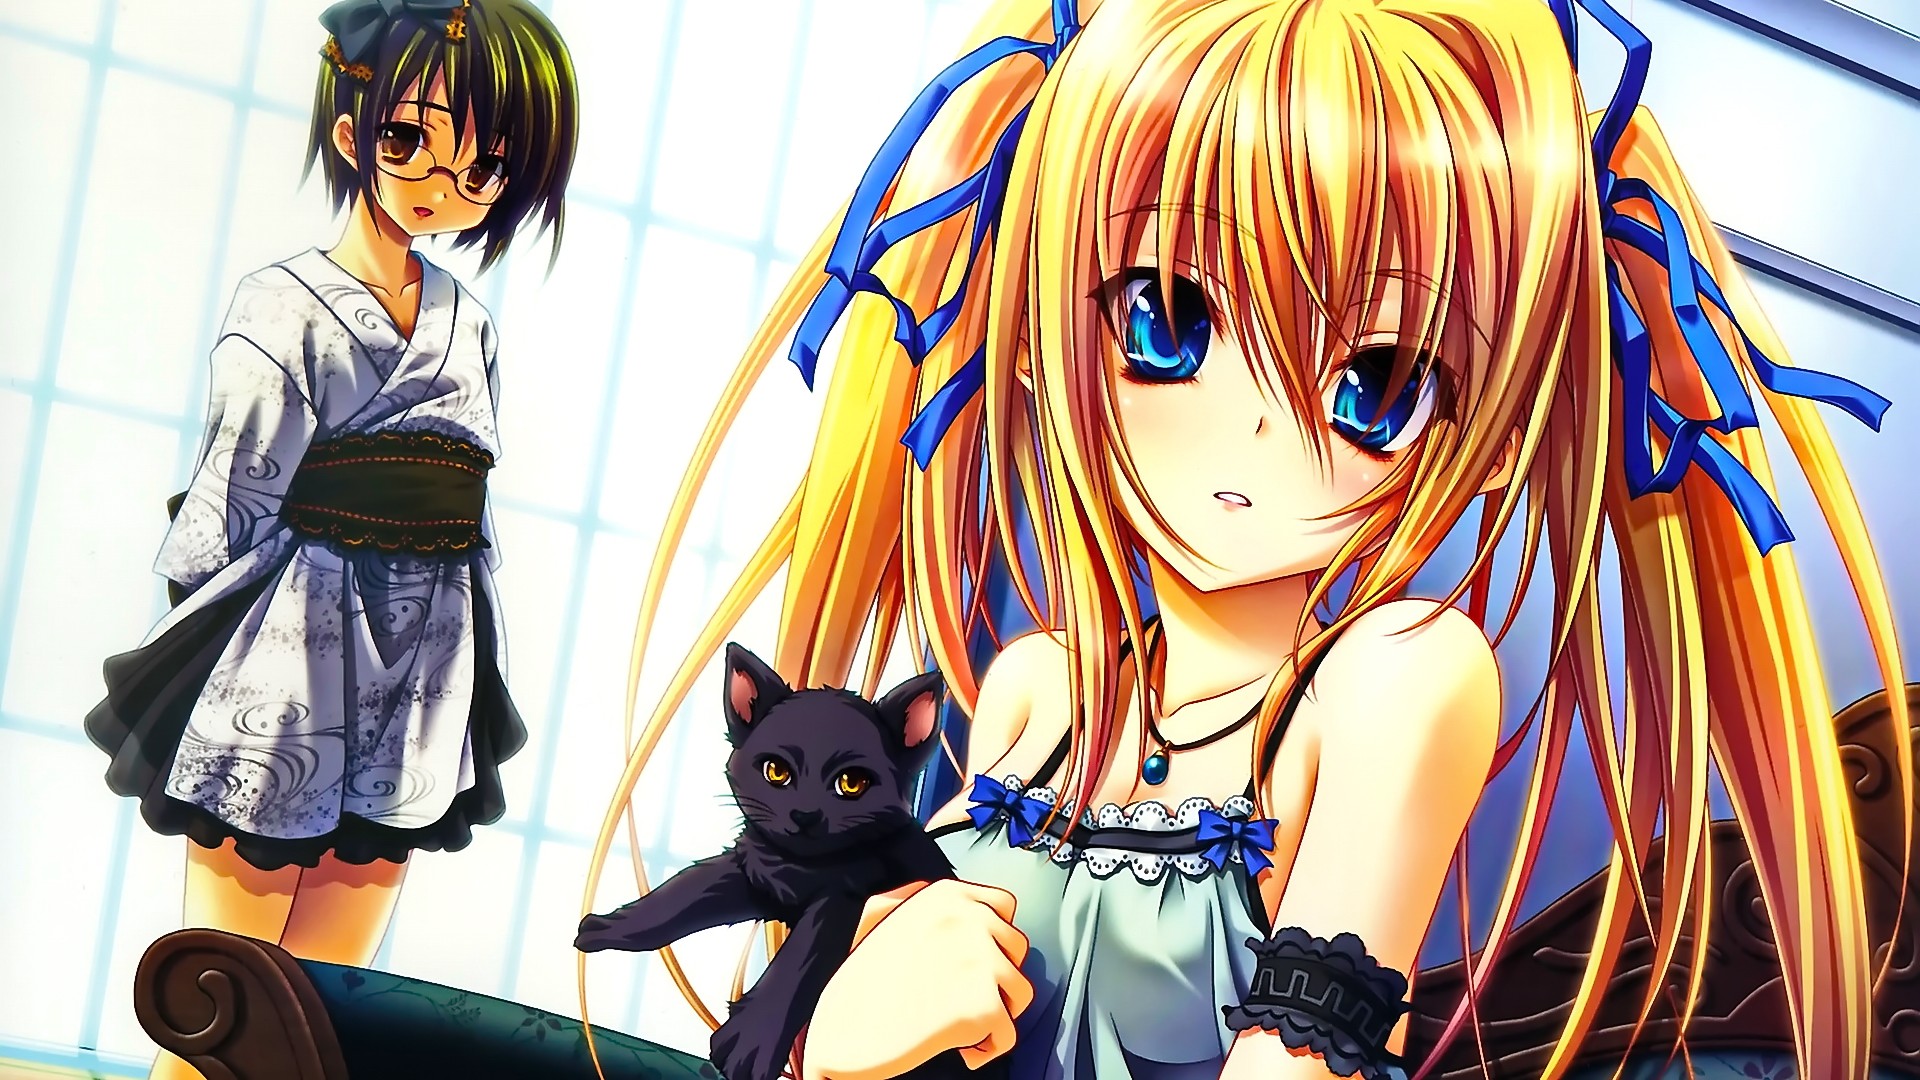 Anime 1920x1080 anime anime girls blonde brunette blue eyes dress animals two women mammals cats face closeup long hair looking at viewer women with glasses necklace